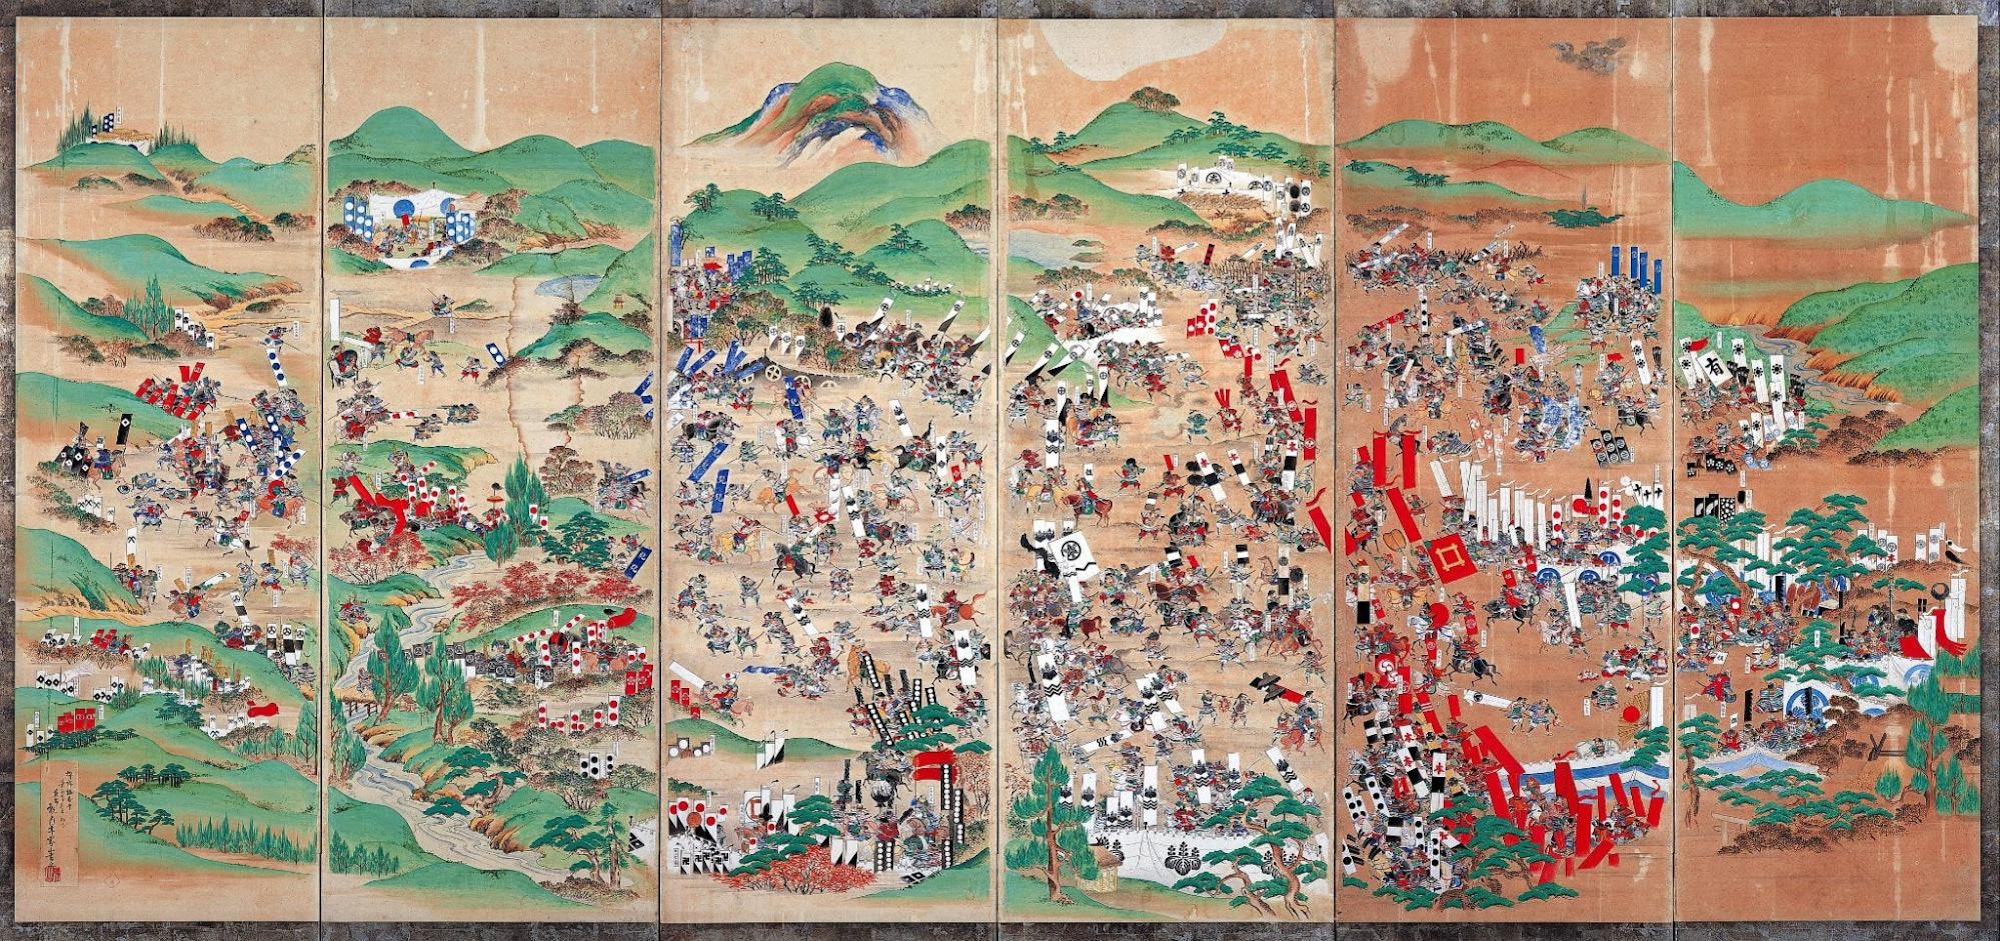 Depiction of the Battle of Sekigahara